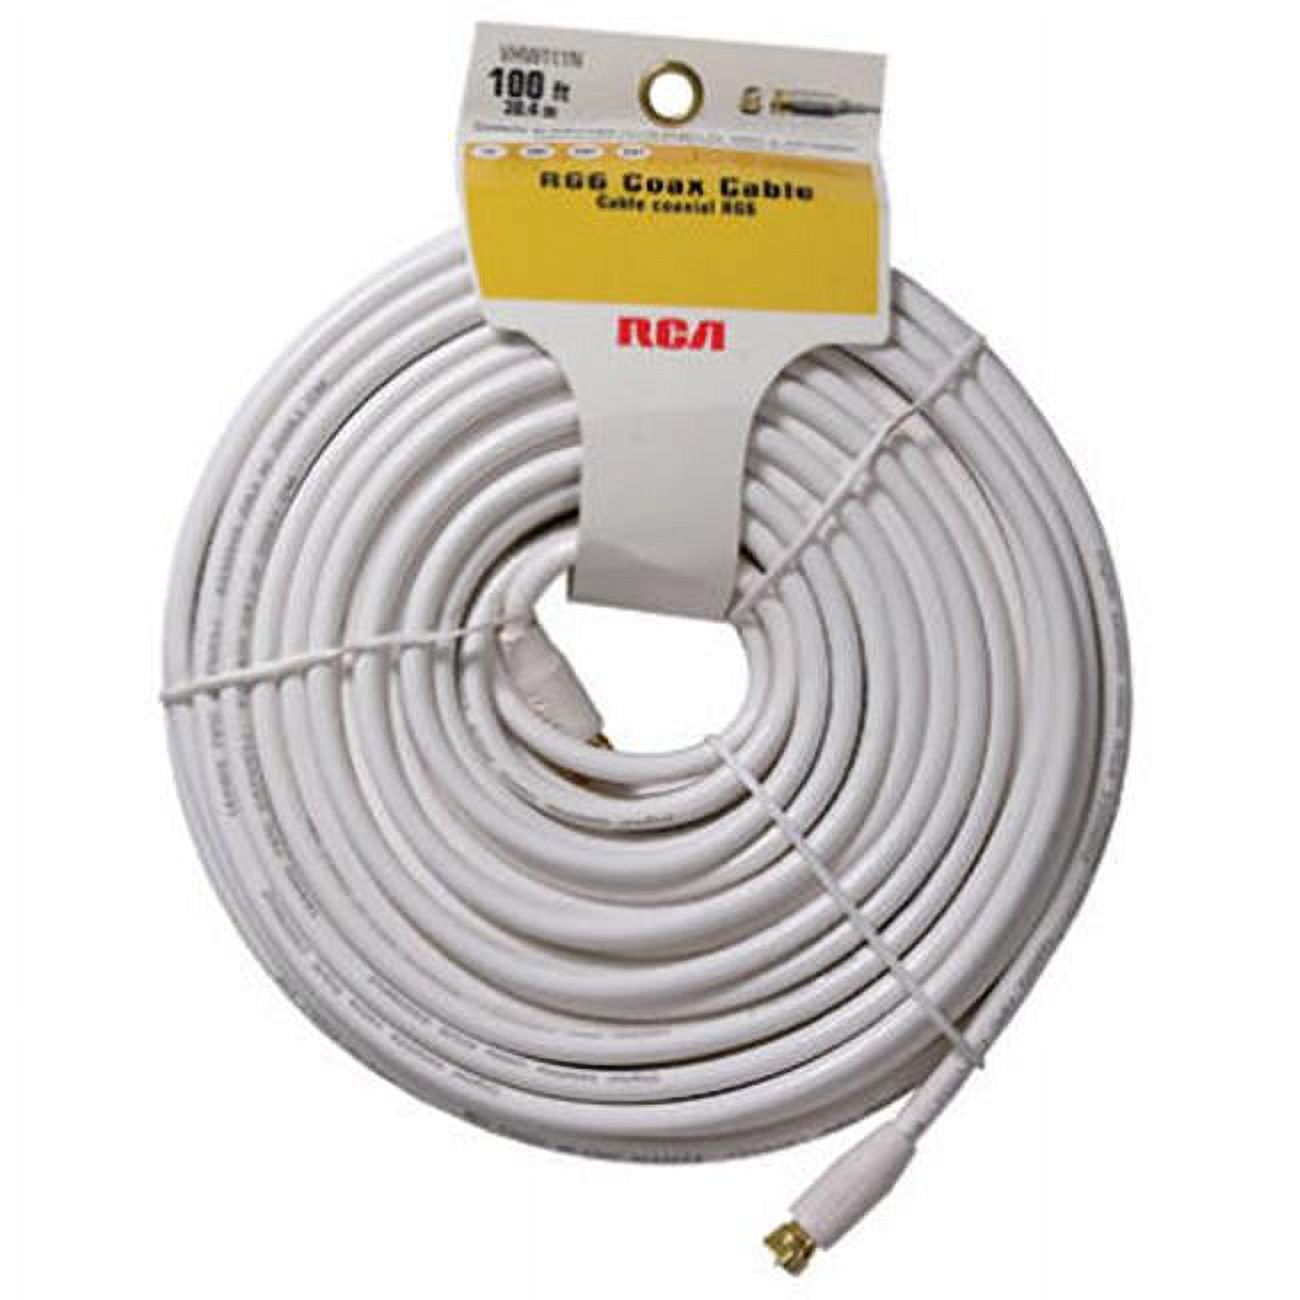 Audiovox VHW111N 100 ft. White Rg6 Coax Cable - image 1 of 2